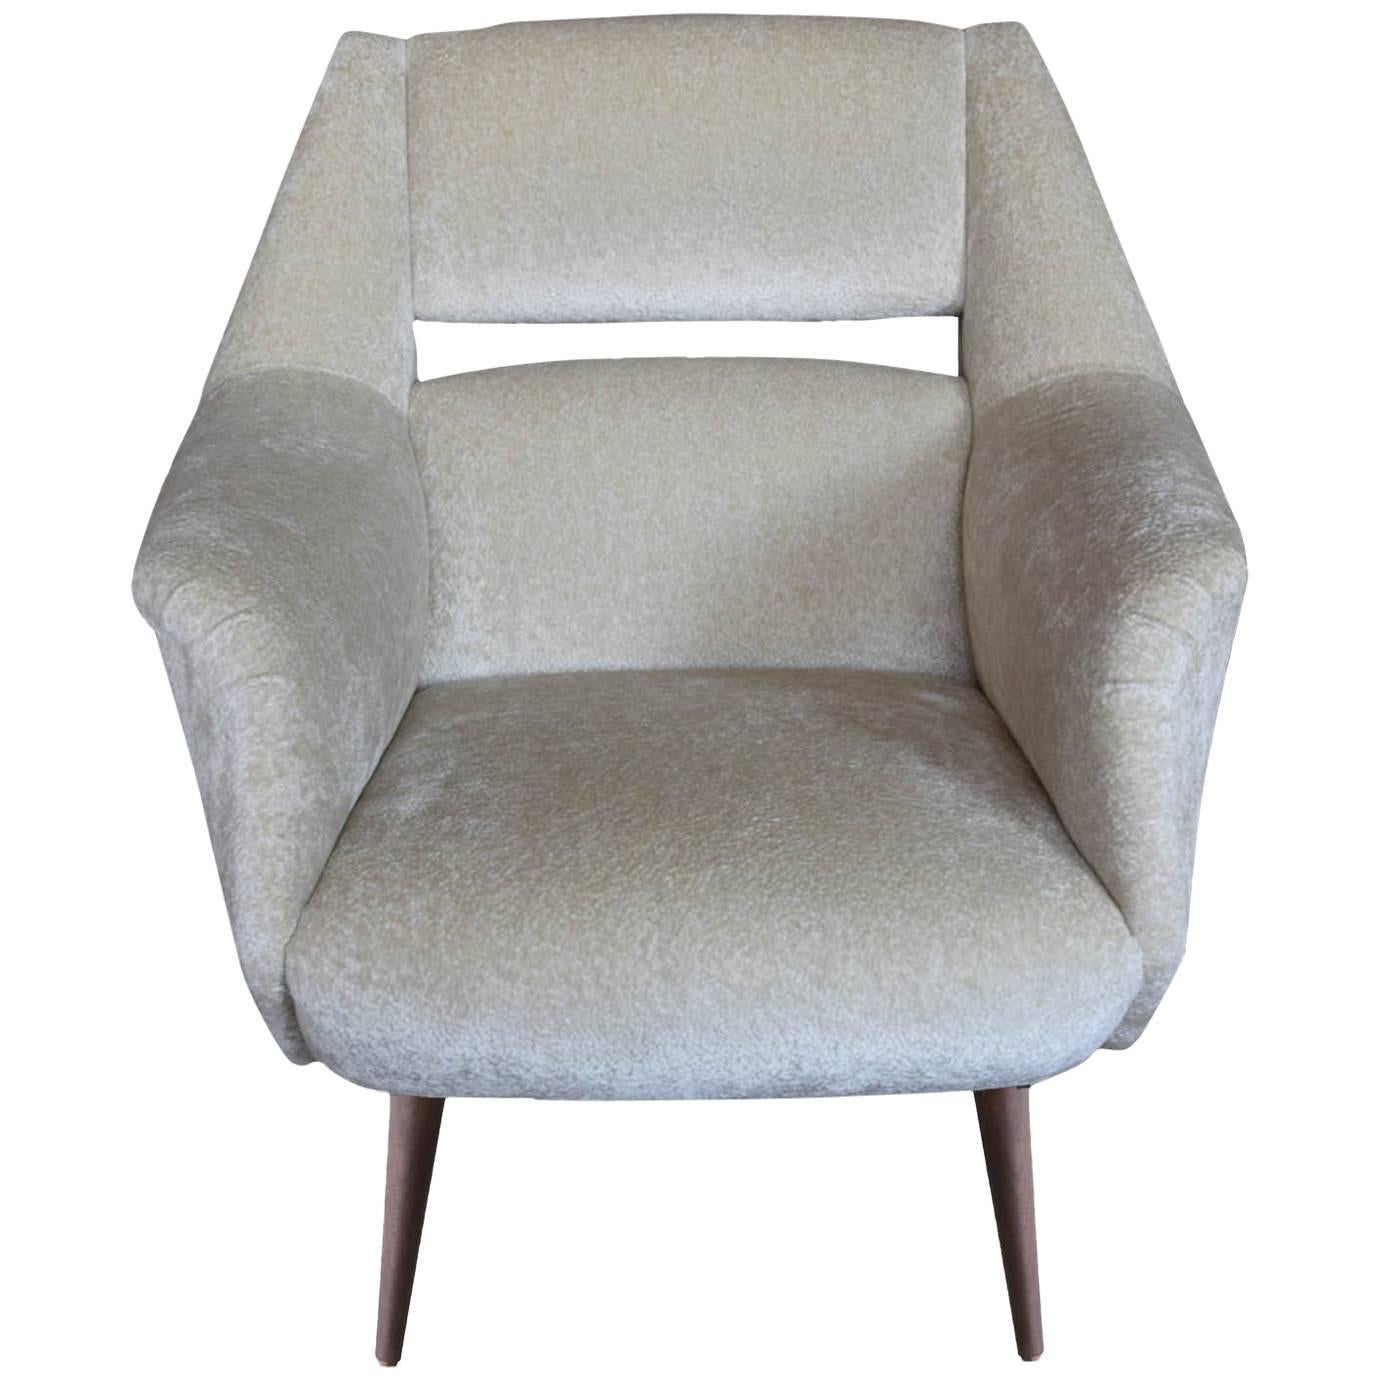 Midcentury Italian Style Sculptural Lounge Chair with Flared Arms For Sale